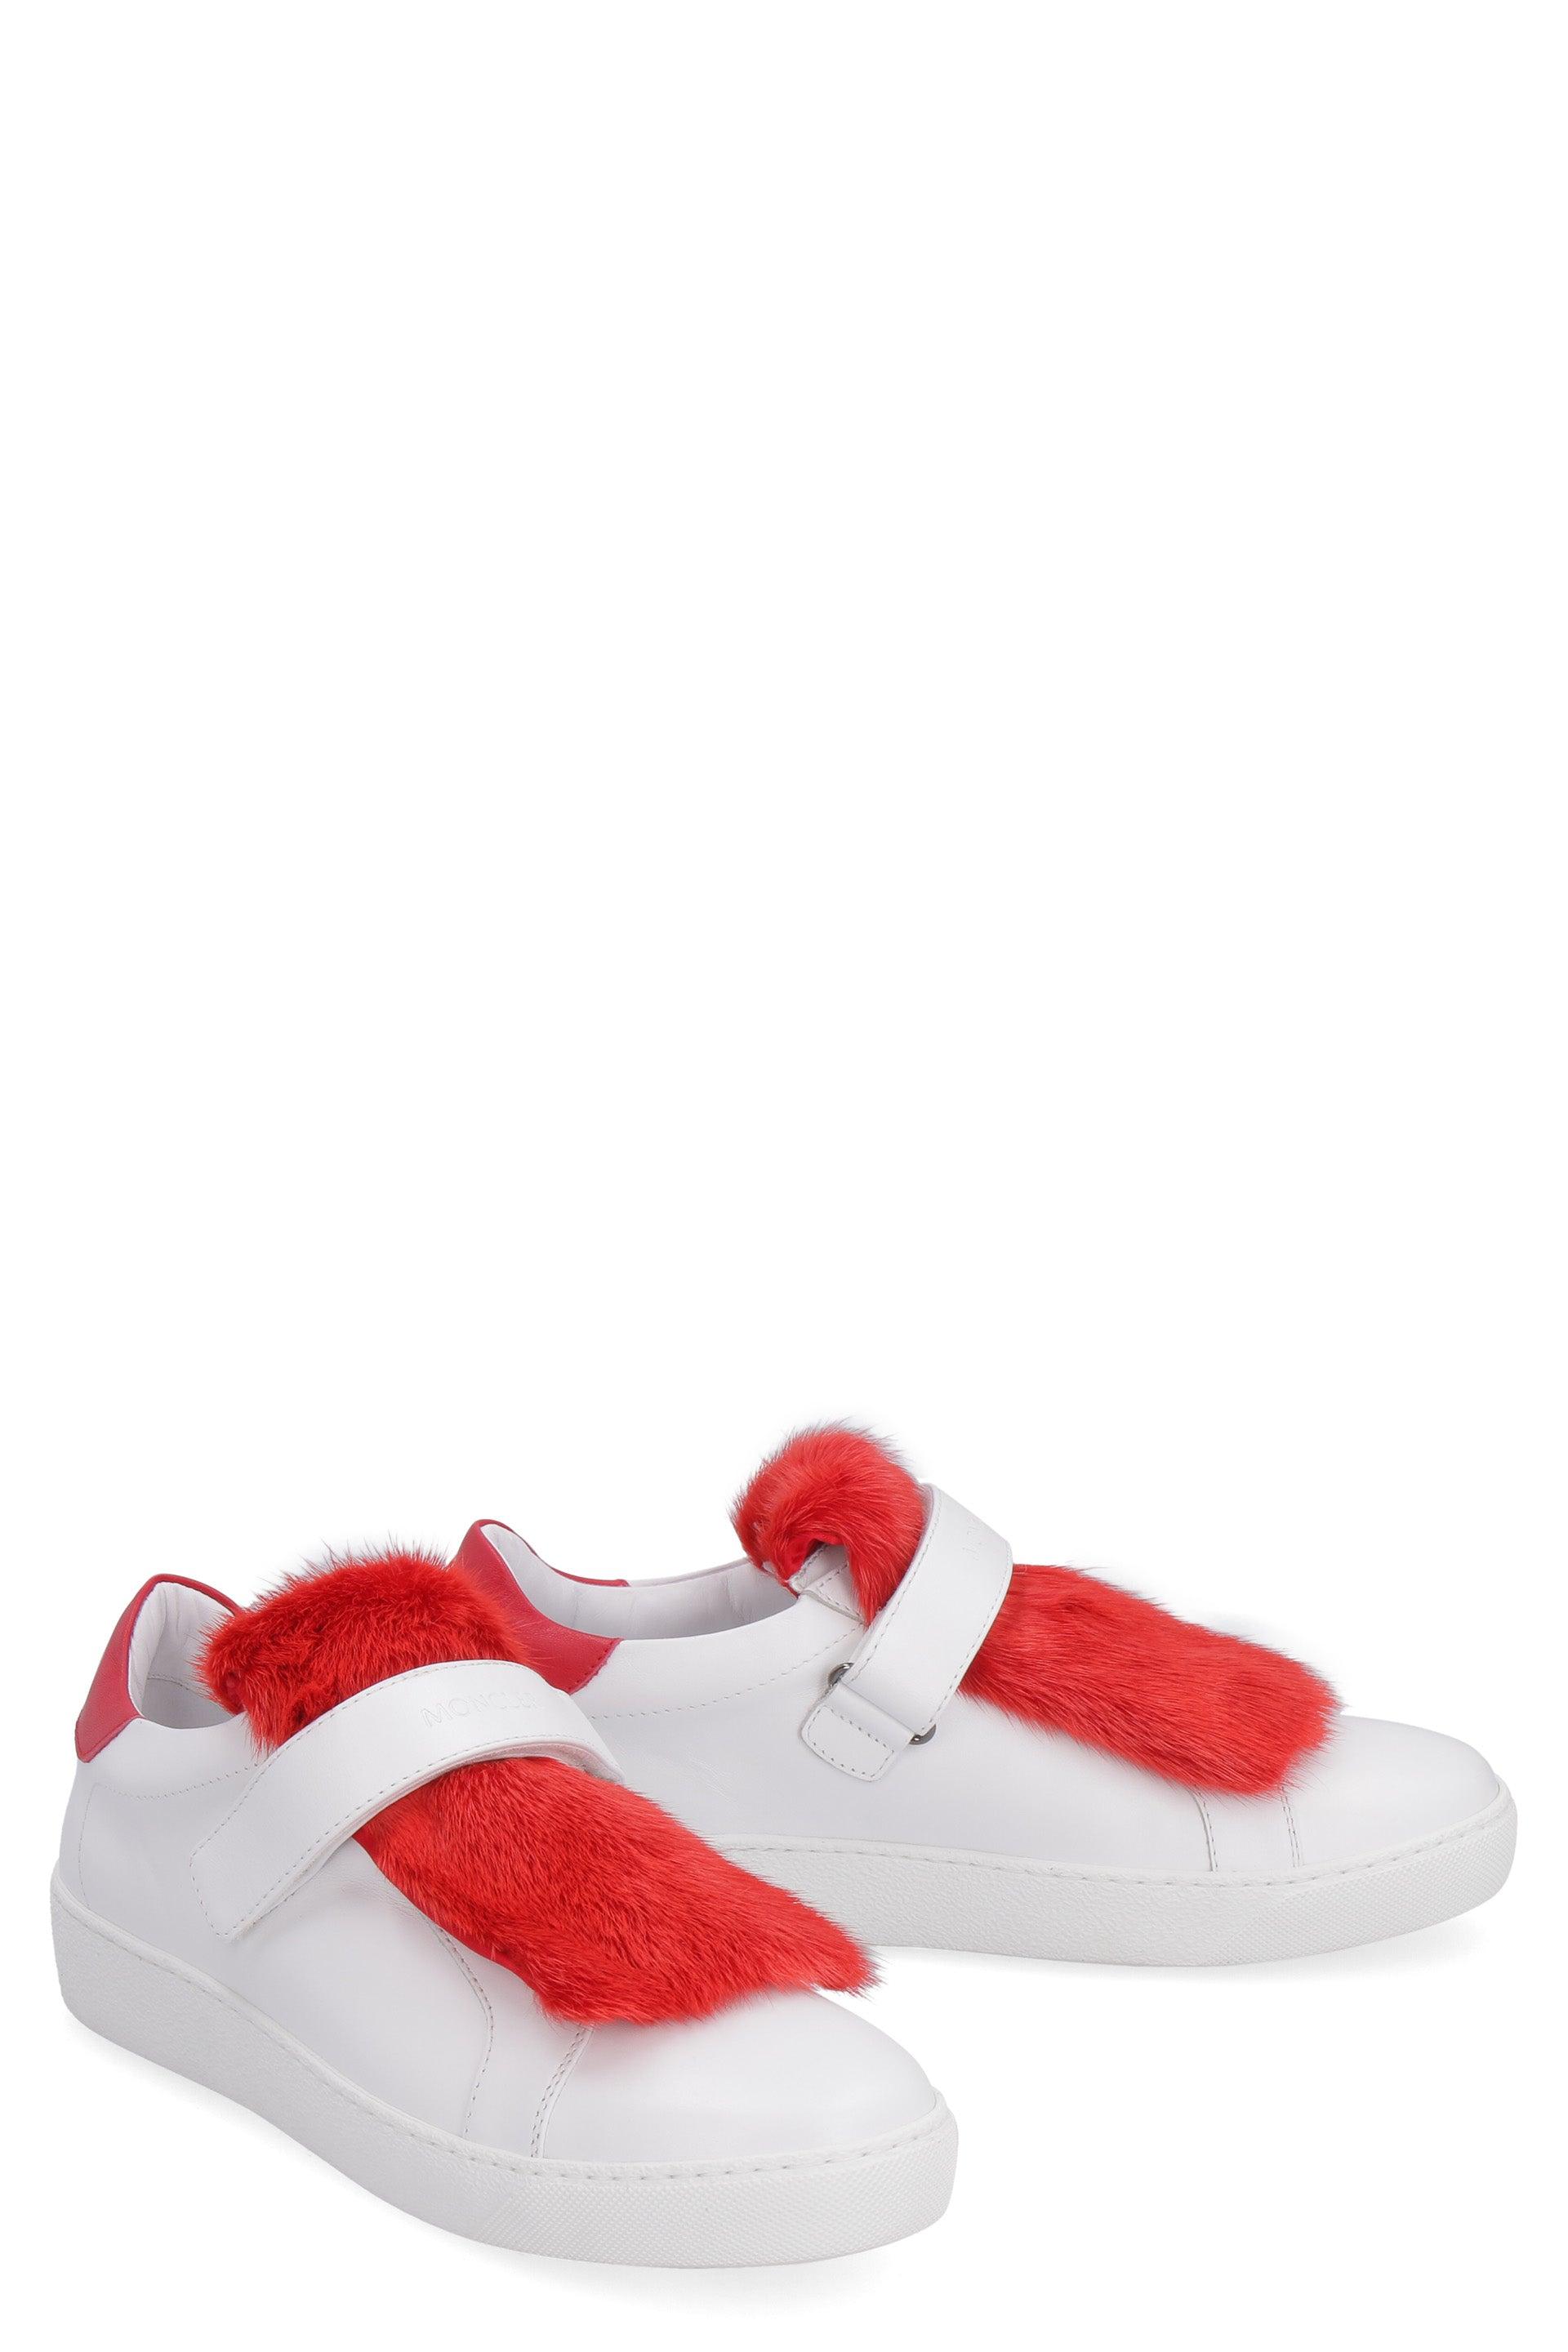 Moncler Lucie Leather Low-top Sneakers in Red | Lyst